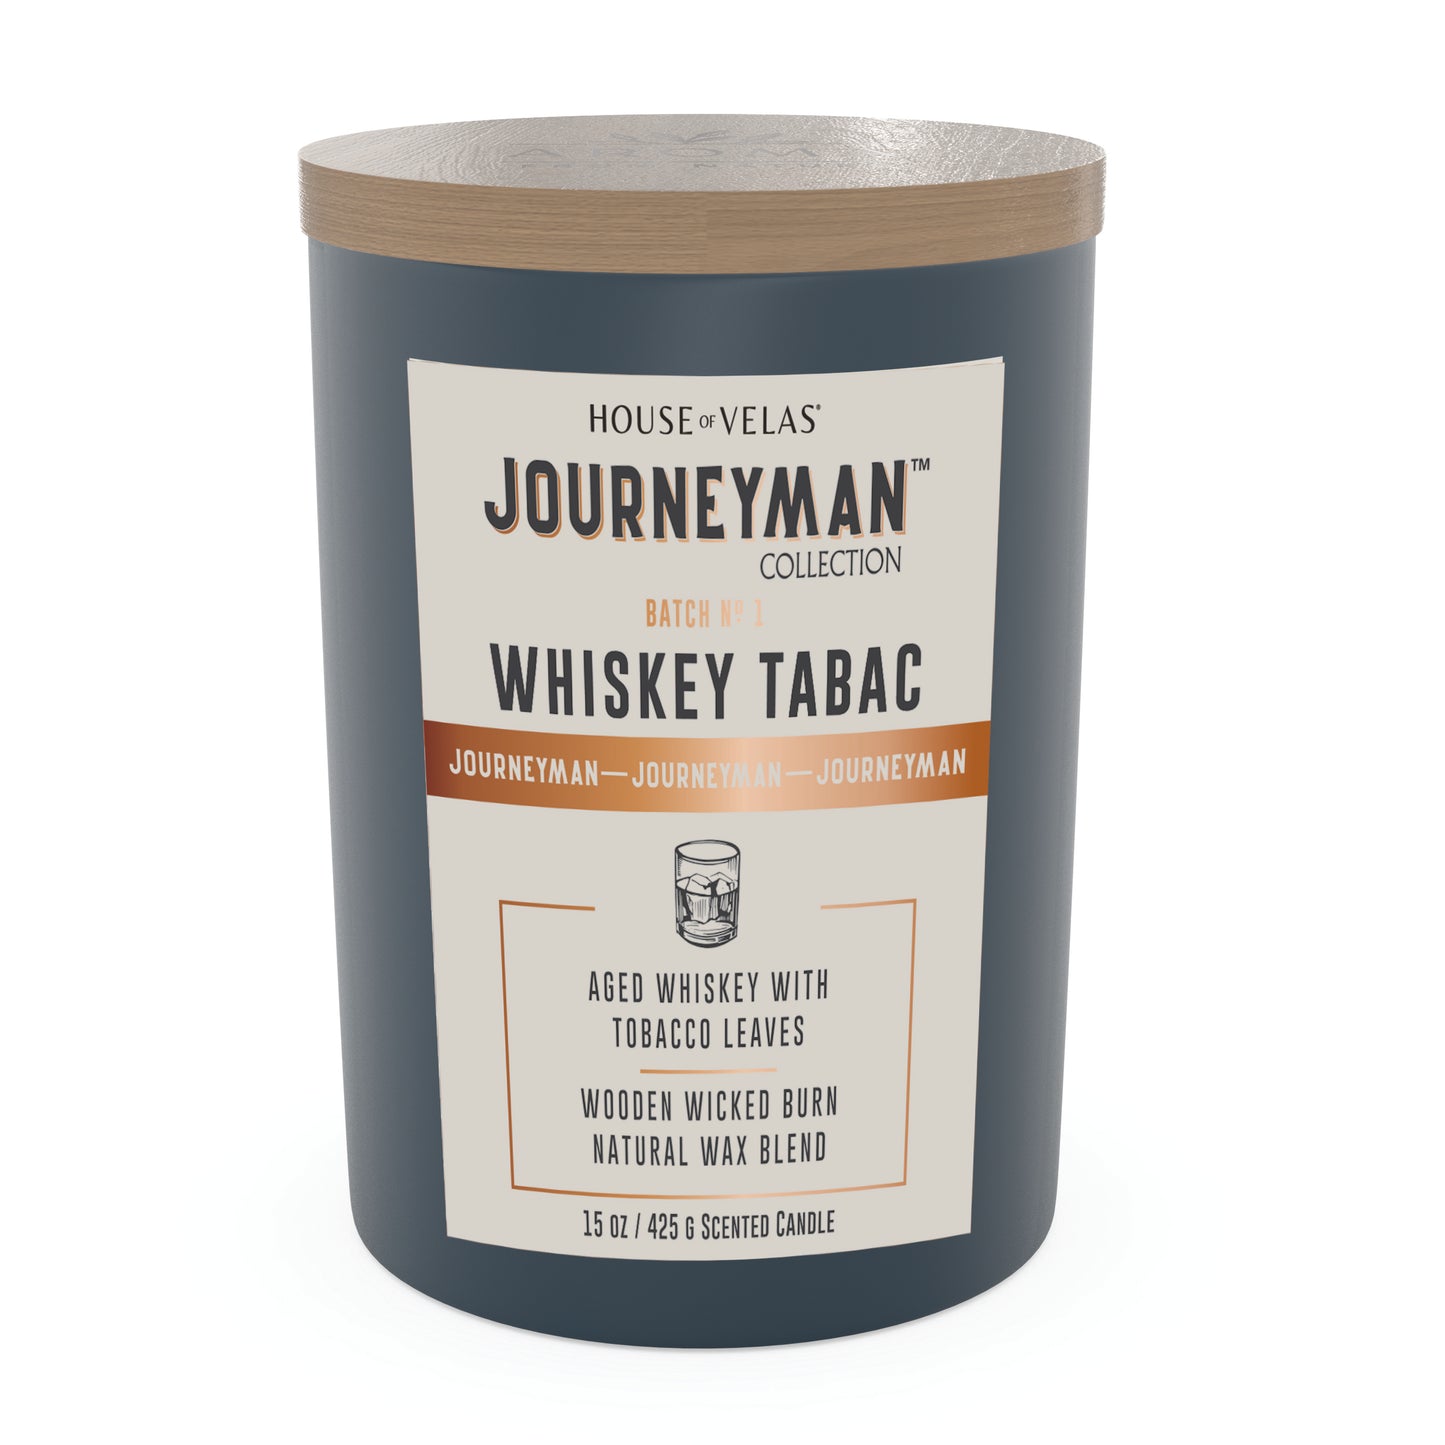 Journeyman by House of Velas - Whiskey Tabac Scented Candle, 15oz